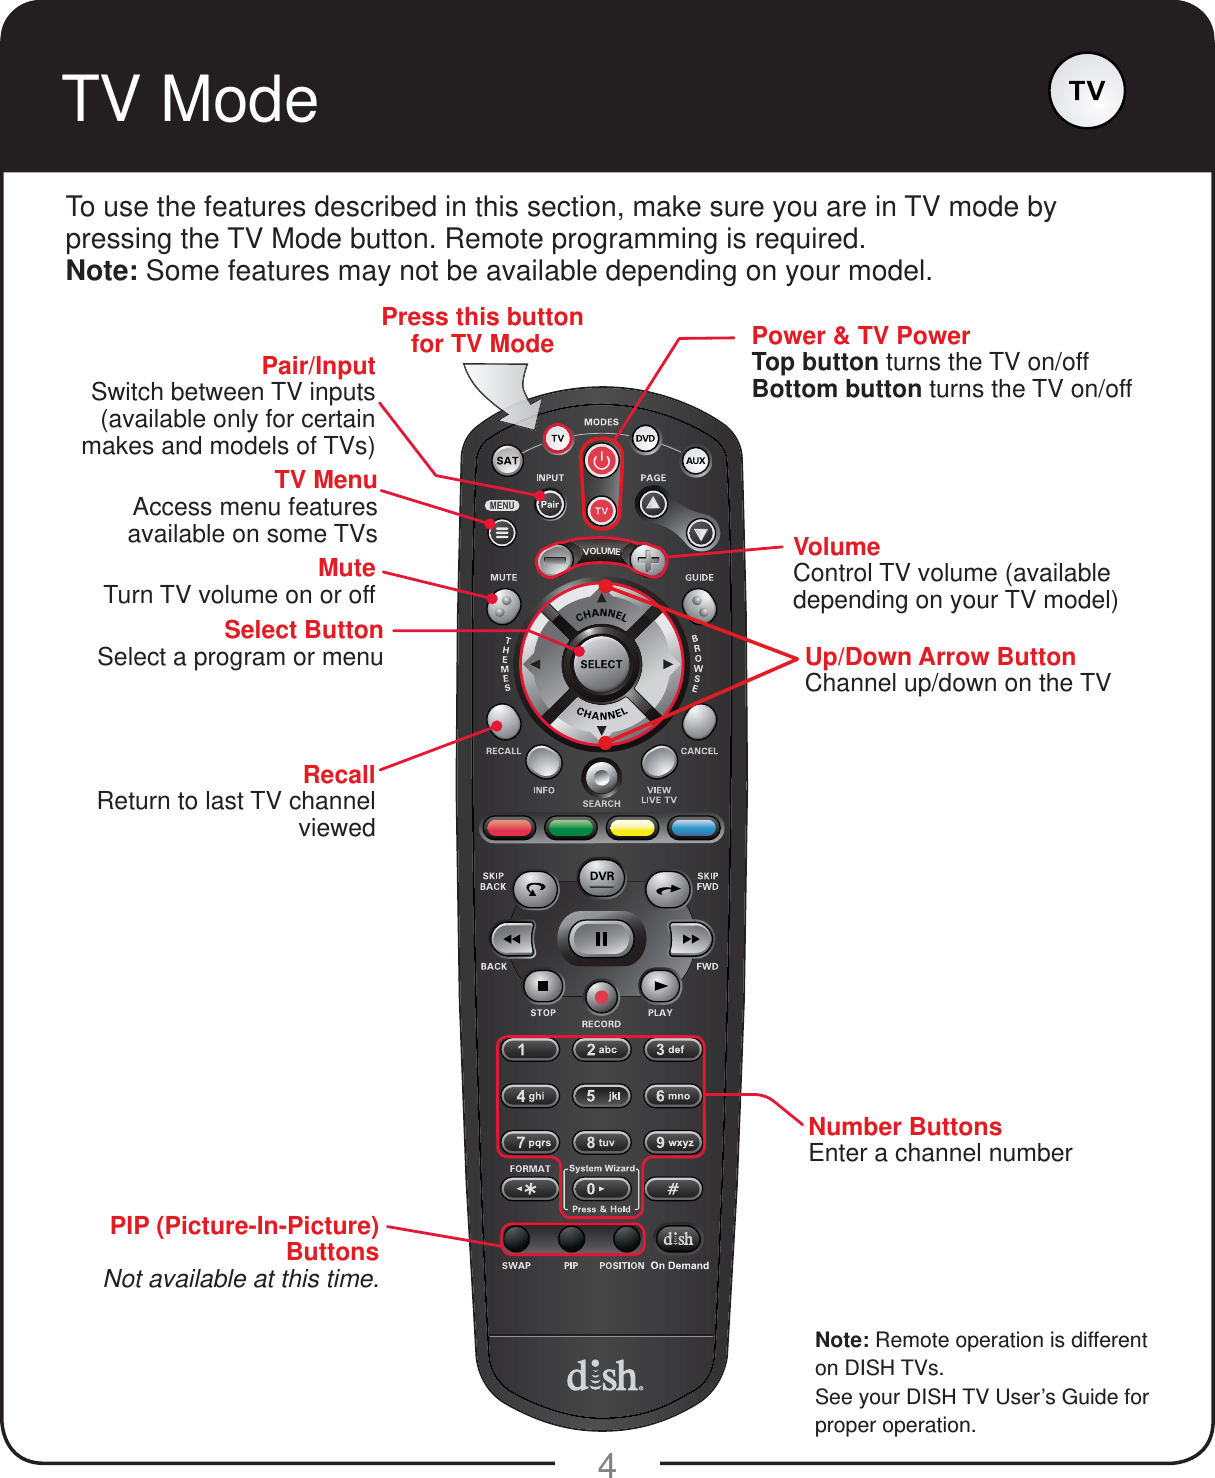 4TV ModeTo use the features described in this section, make sure you are in TV mode by pressing the TV Mode button. Remote programming is required. Note: Some features may not be available depending on your model.Note: Remote operation is different on DISH TVs.  See your DISH TV User’s Guide for proper operation.Power &amp; TV PowerTop button turns the TV on/offBottom button turns the TV on/offPress this button for TV ModeMuteTurn TV volume on or offRecallReturn to last TV channel viewedPIP (Picture-In-Picture) ButtonsNot available at this time.Number ButtonsEnter a channel numberTV MenuAccess menu features available on some TVsPair/InputSwitch between TV inputs (available only for certain makes and models of TVs)Up/Down Arrow ButtonChannel up/down on the TVVolumeControl TV volume (available depending on your TV model)Select ButtonSelect a program or menu